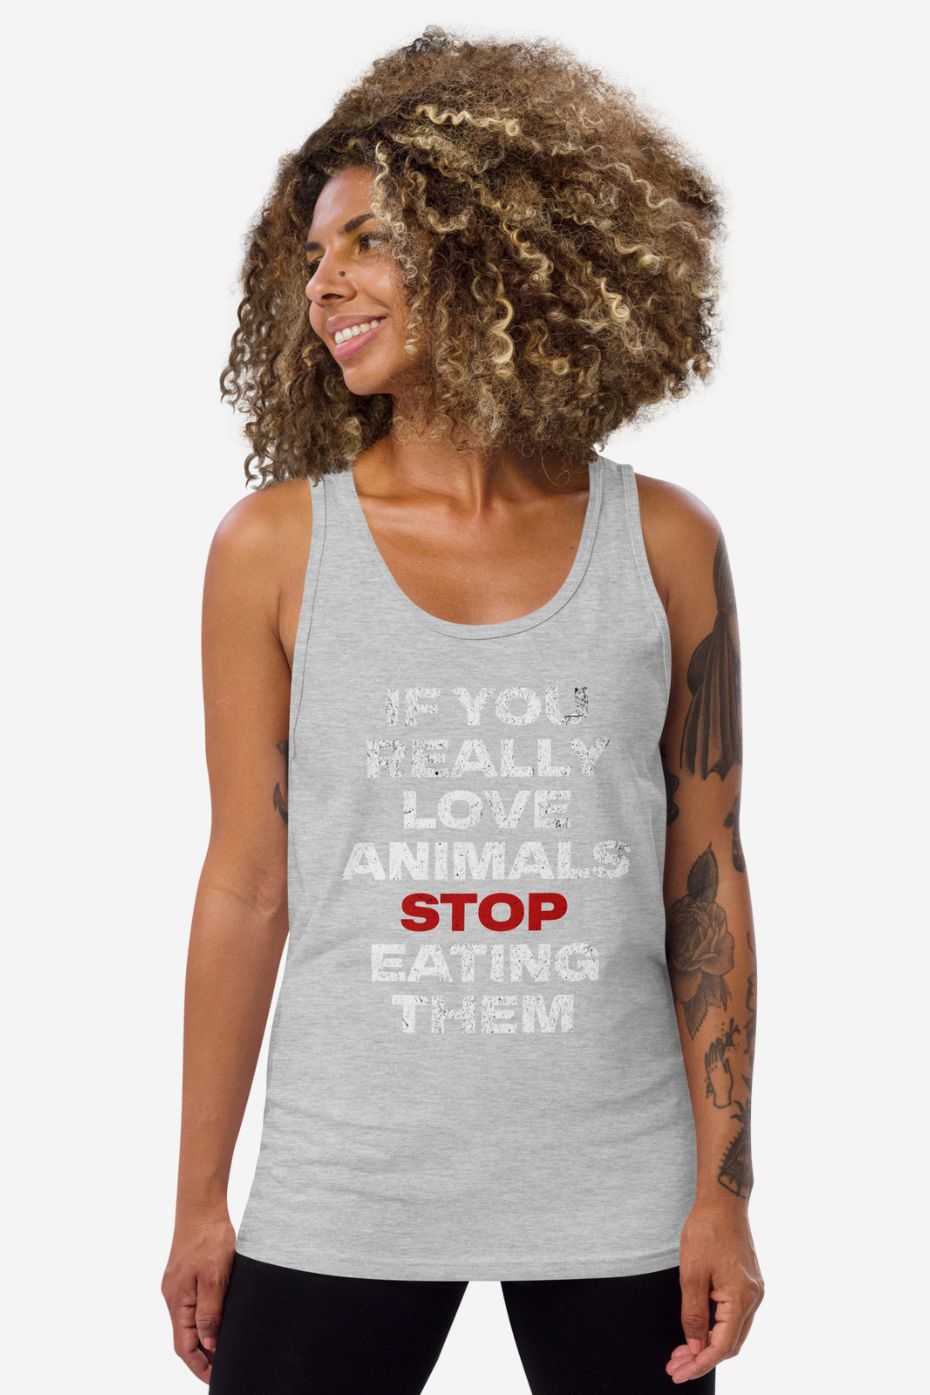 If You Really Love Animals - Unisex Tank Top